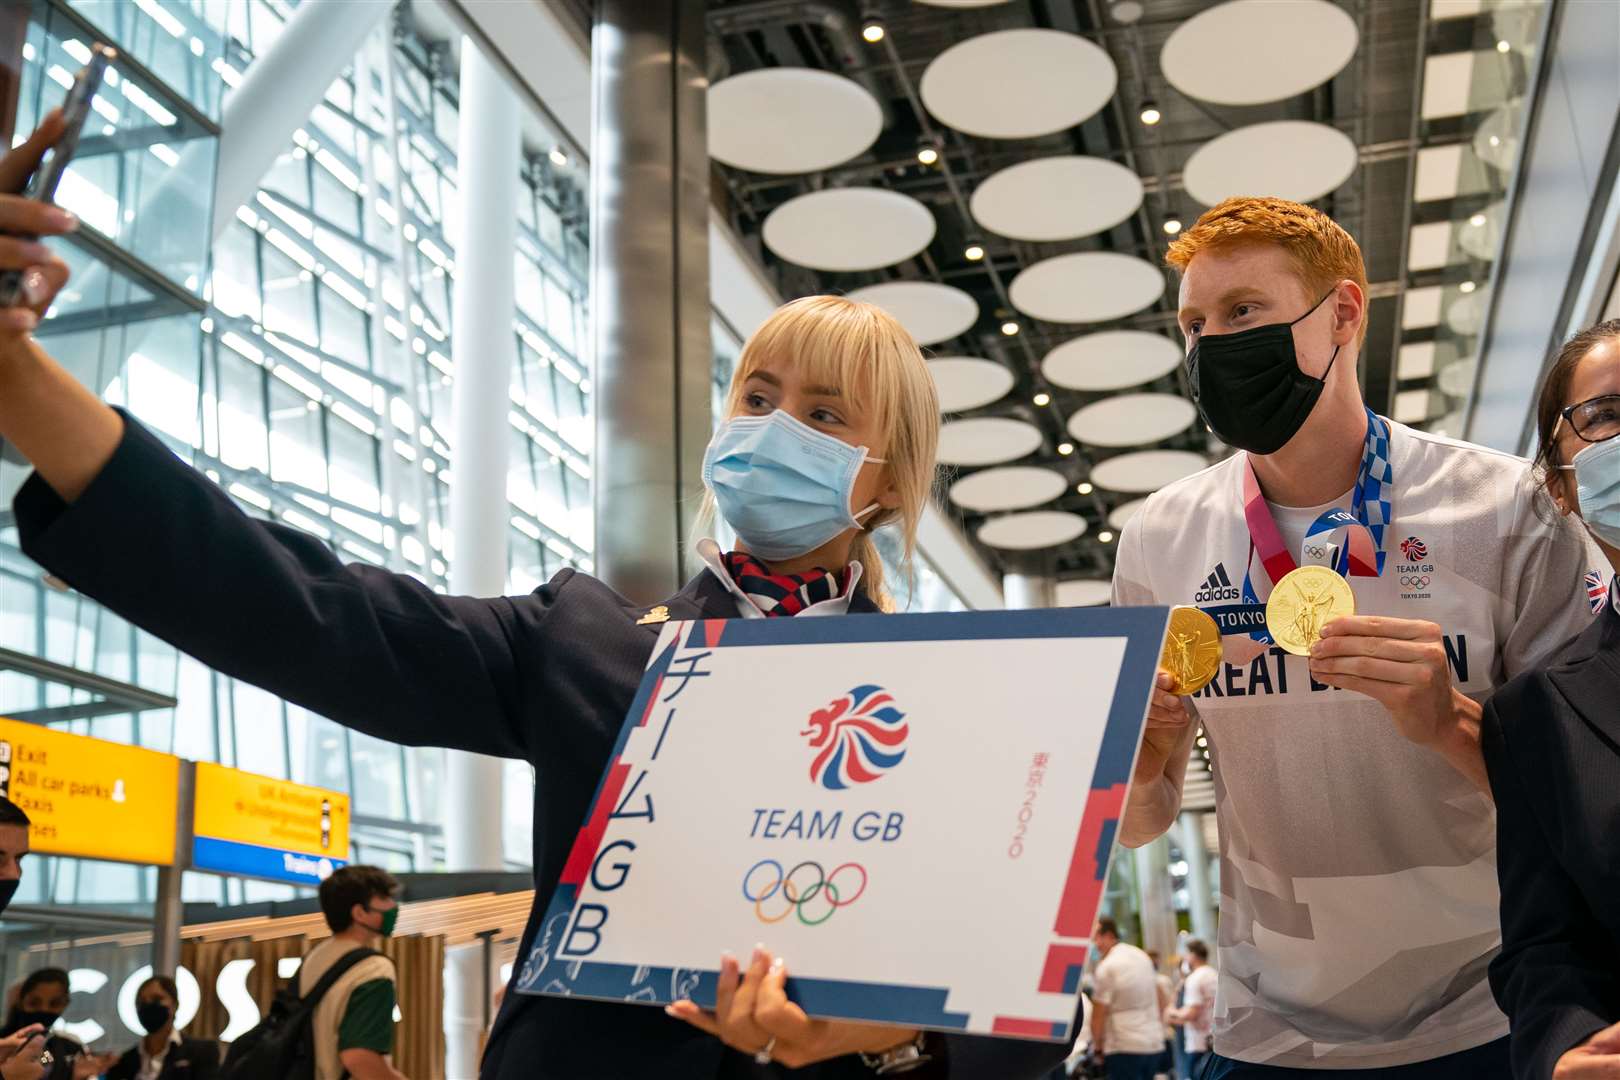 Tom Dean poses for a selfie at Heathrow (Aaron Chown/PA)